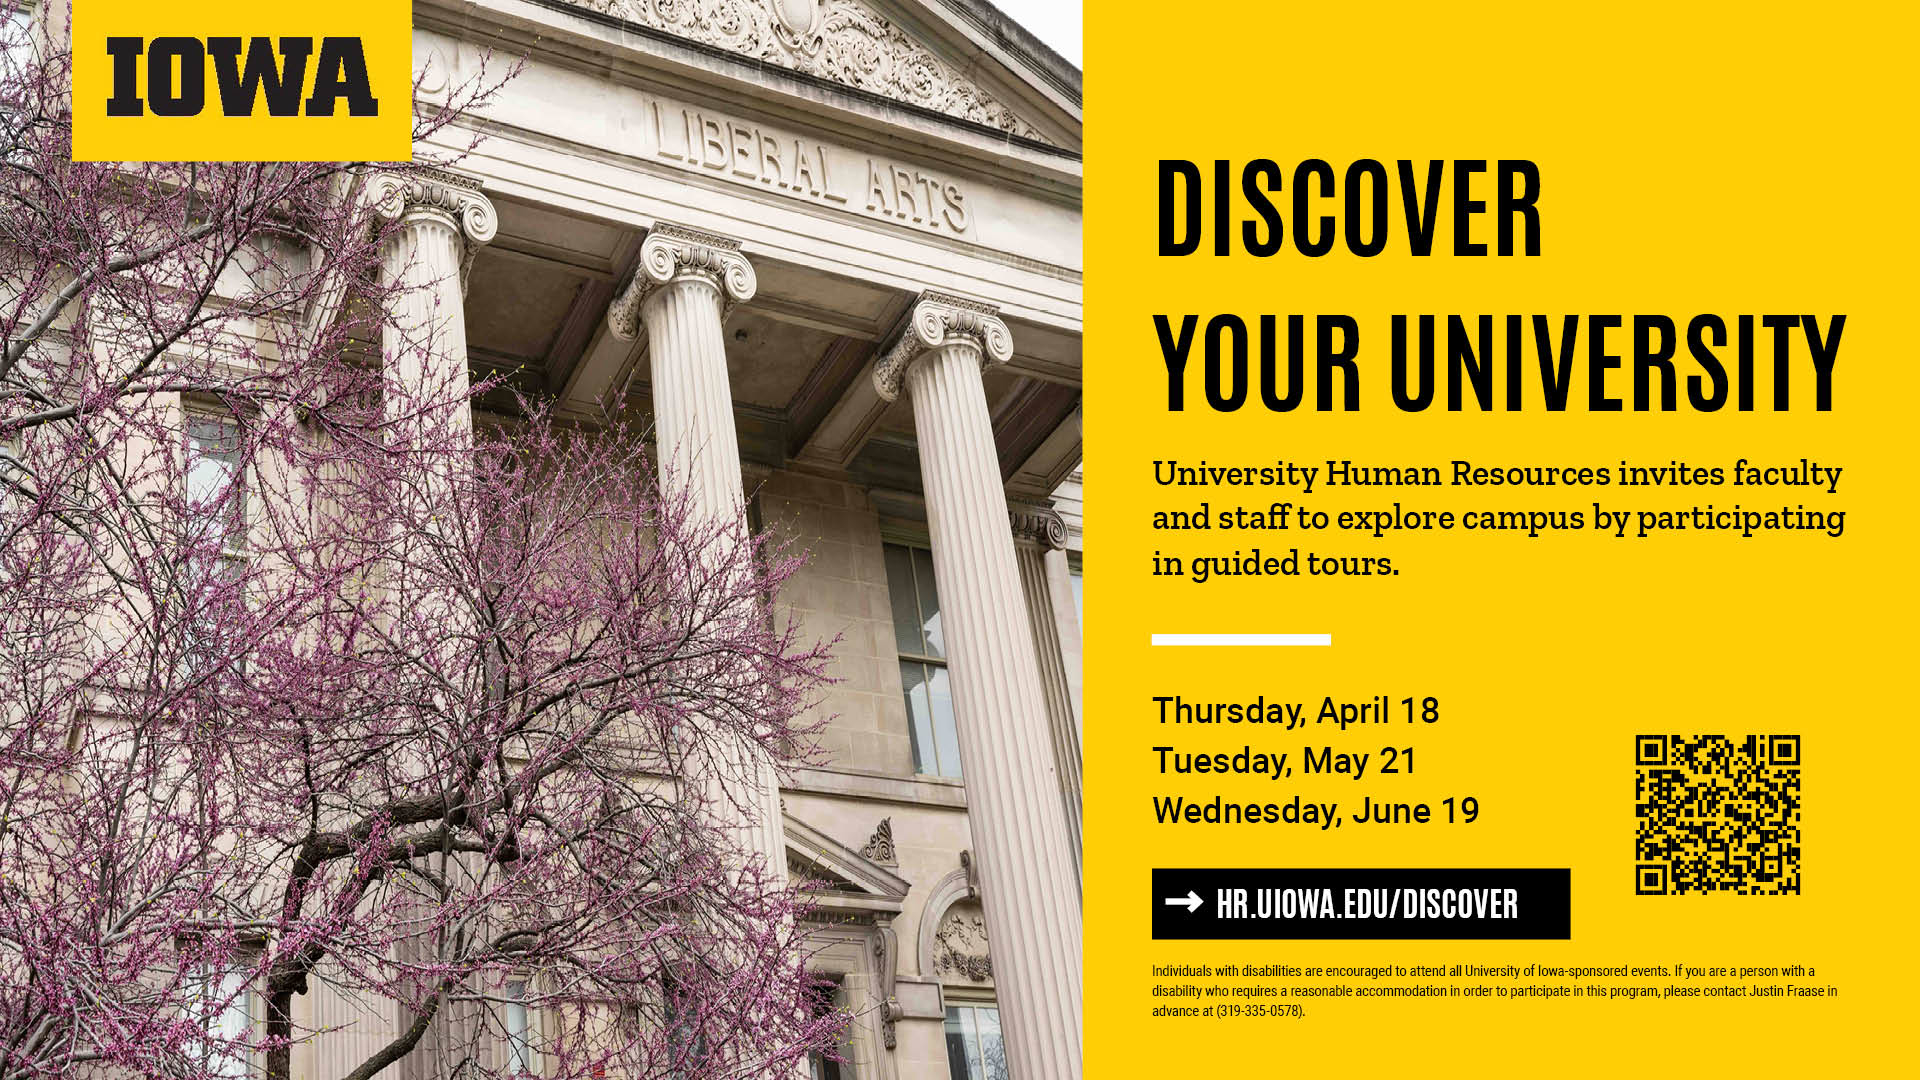 Discover Your University - University Human Resources invites faculty and sTaff to explore campus by participating in guided tours Thursday April 18, Tuesday May 21 and Wednesday, June 19 hr.uiowa.edu/discover